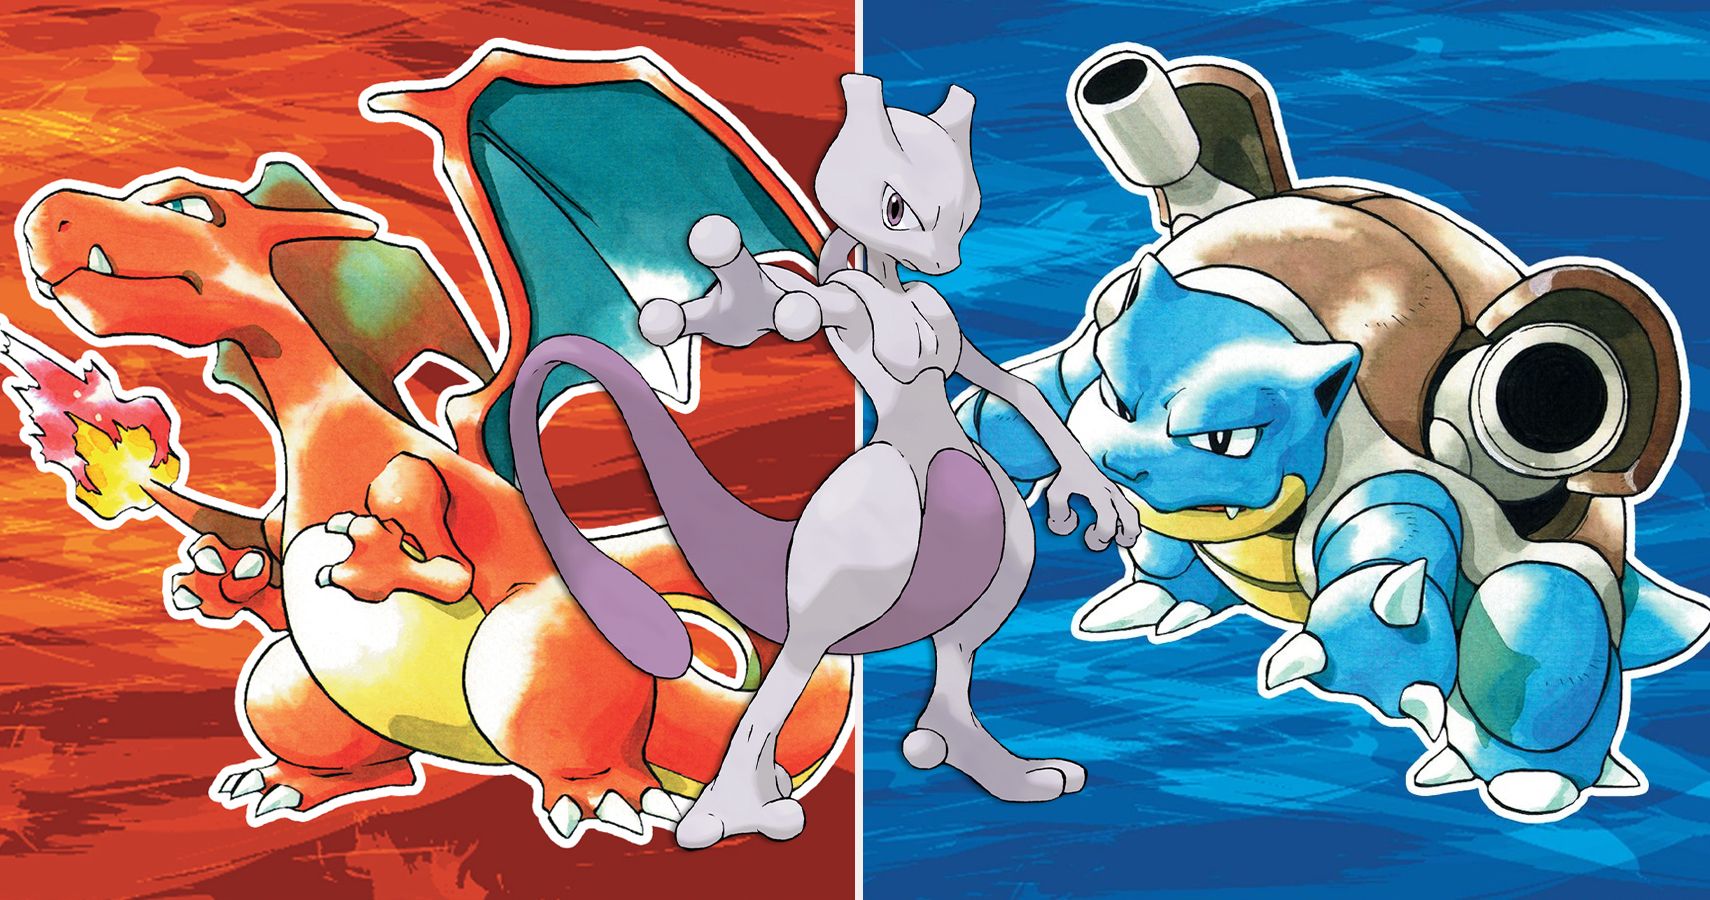 15 Strongest Pokemon In The Original Red Blue Games Based On Stats